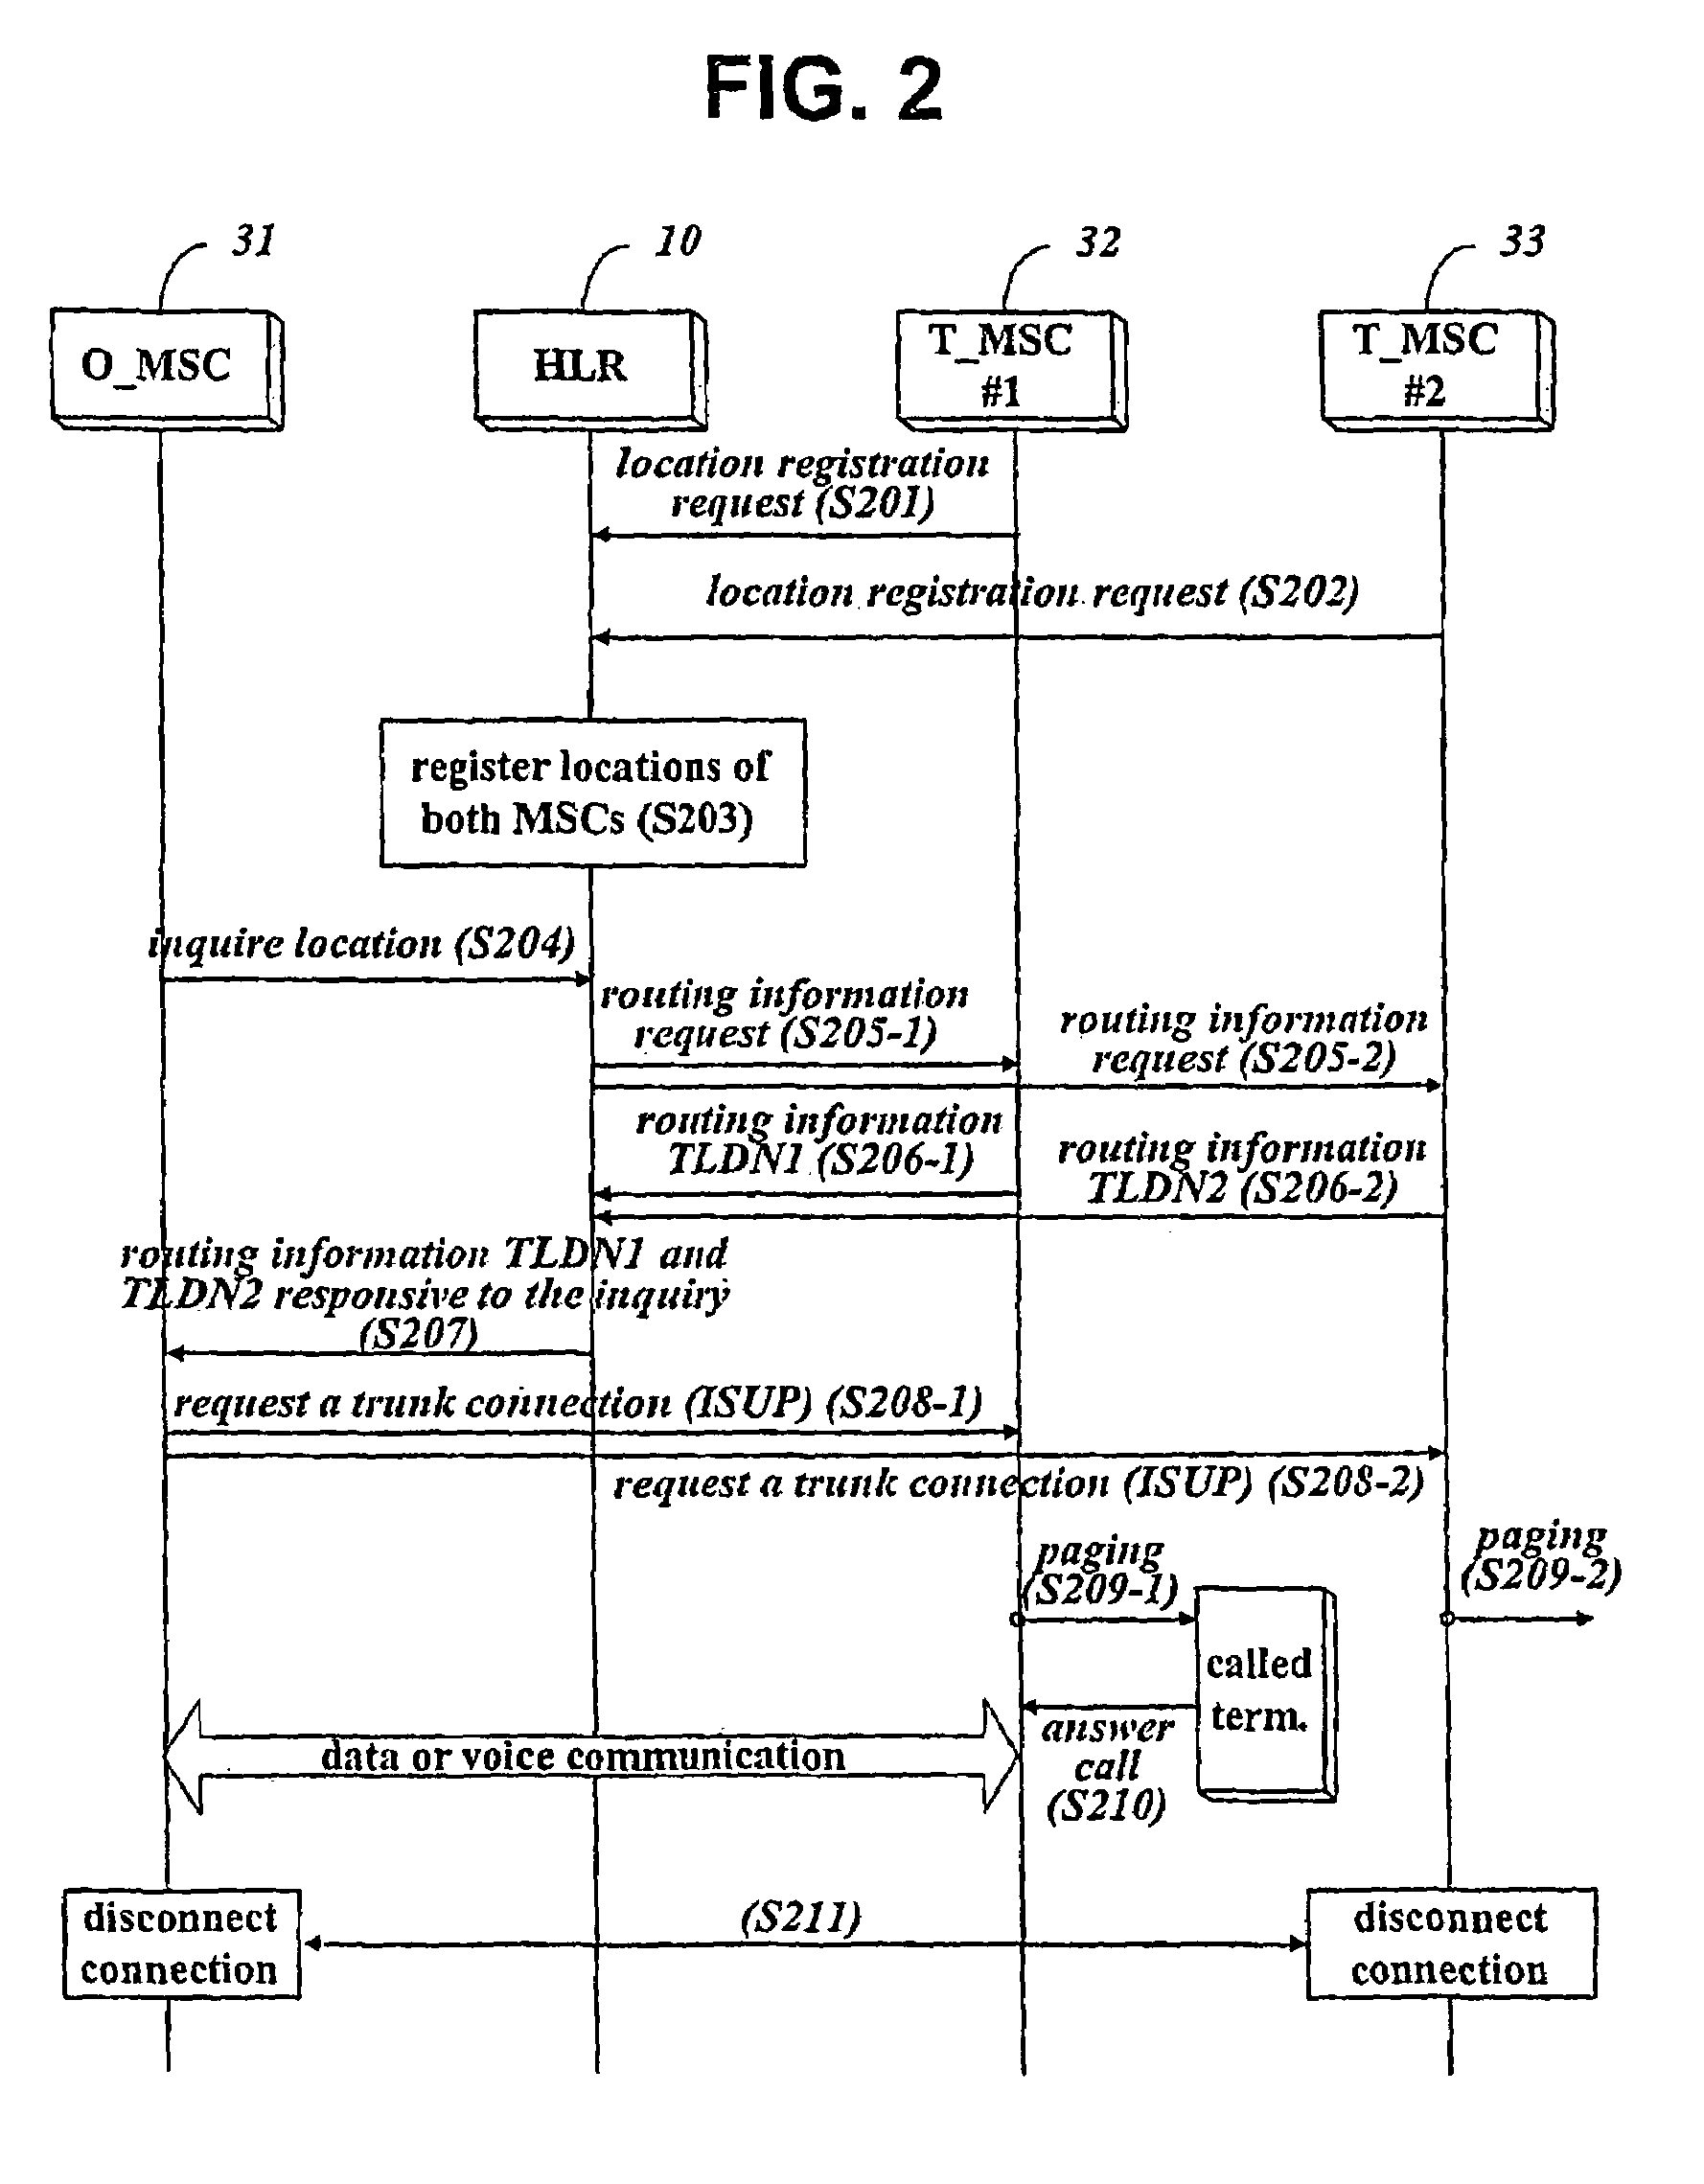 Method for providing subscriber-based ringback tone in flexible paging mode